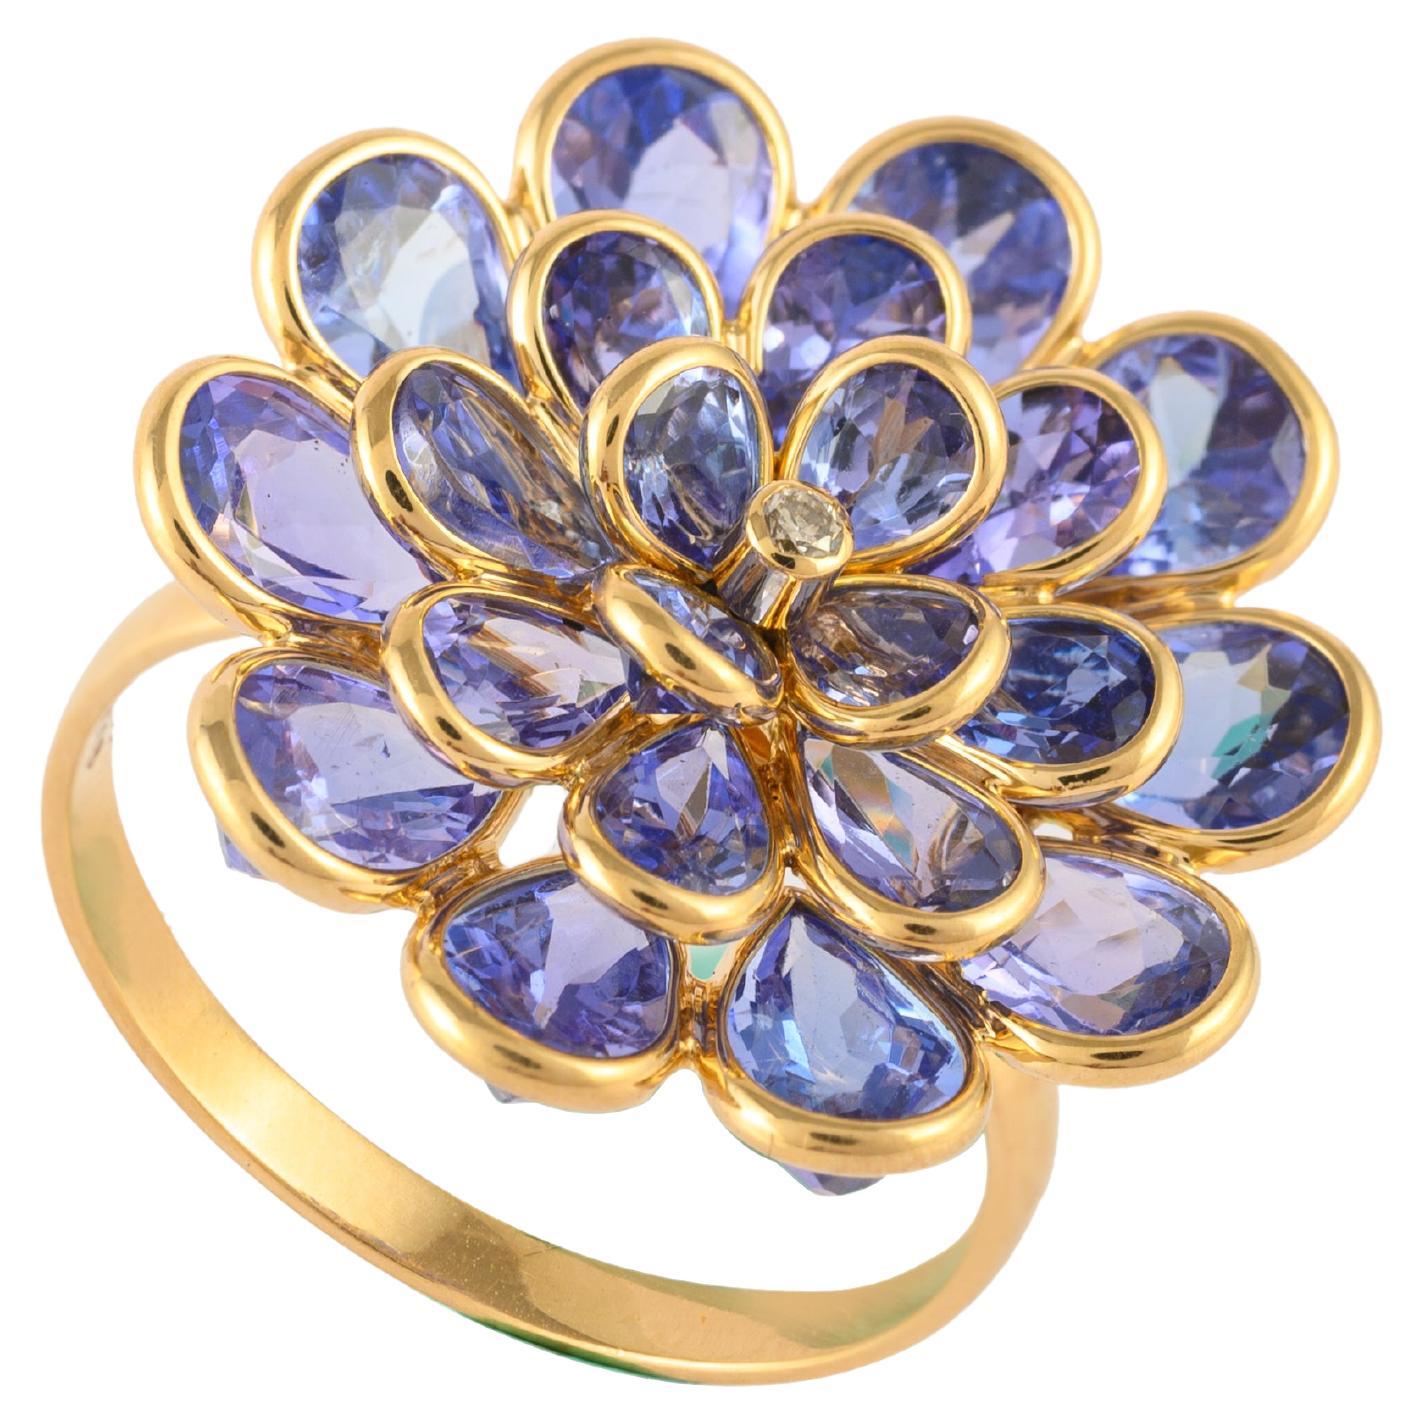 For Sale:  6.26ct Tanzanite Flower Ring with Diamond in 18k Solid Yellow Gold